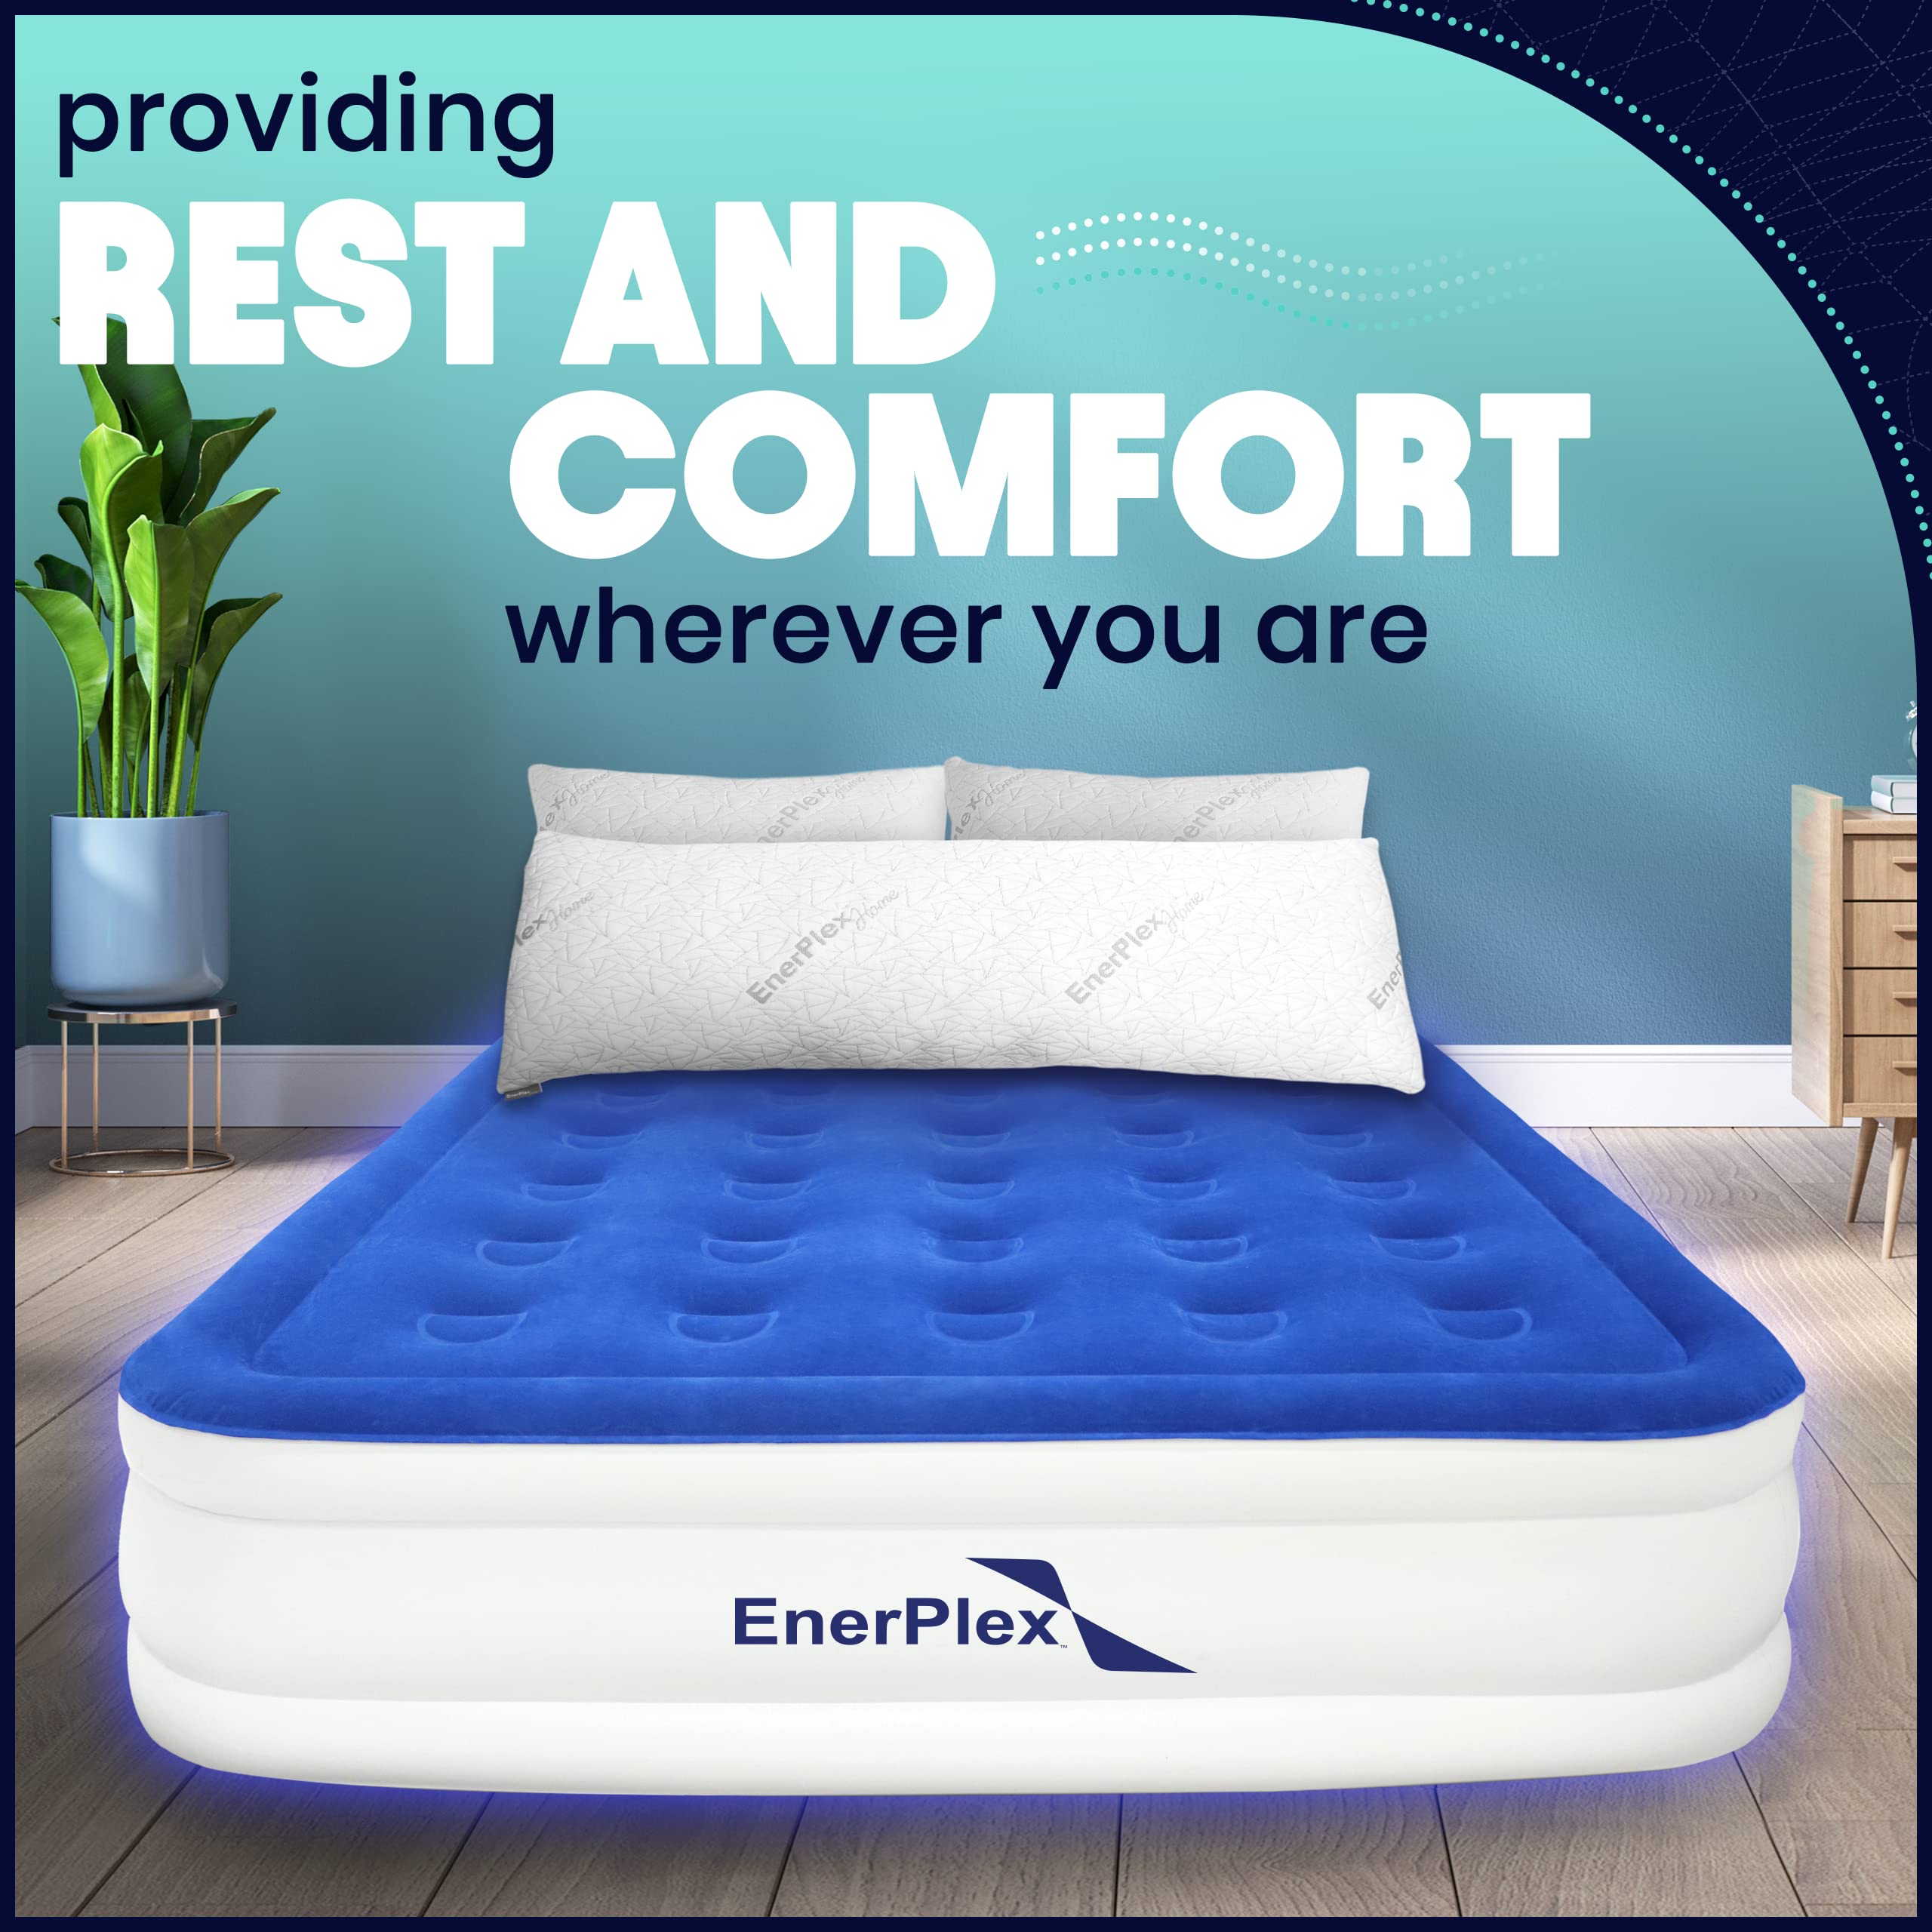 EnerPlex Air Mattress with Built-in Pump - Double Height Inflatable Mattress for Camping, Home & Portable Travel - Durable Blow Up Bed with Dual Pump - Easy to Inflate/Quick Set UP